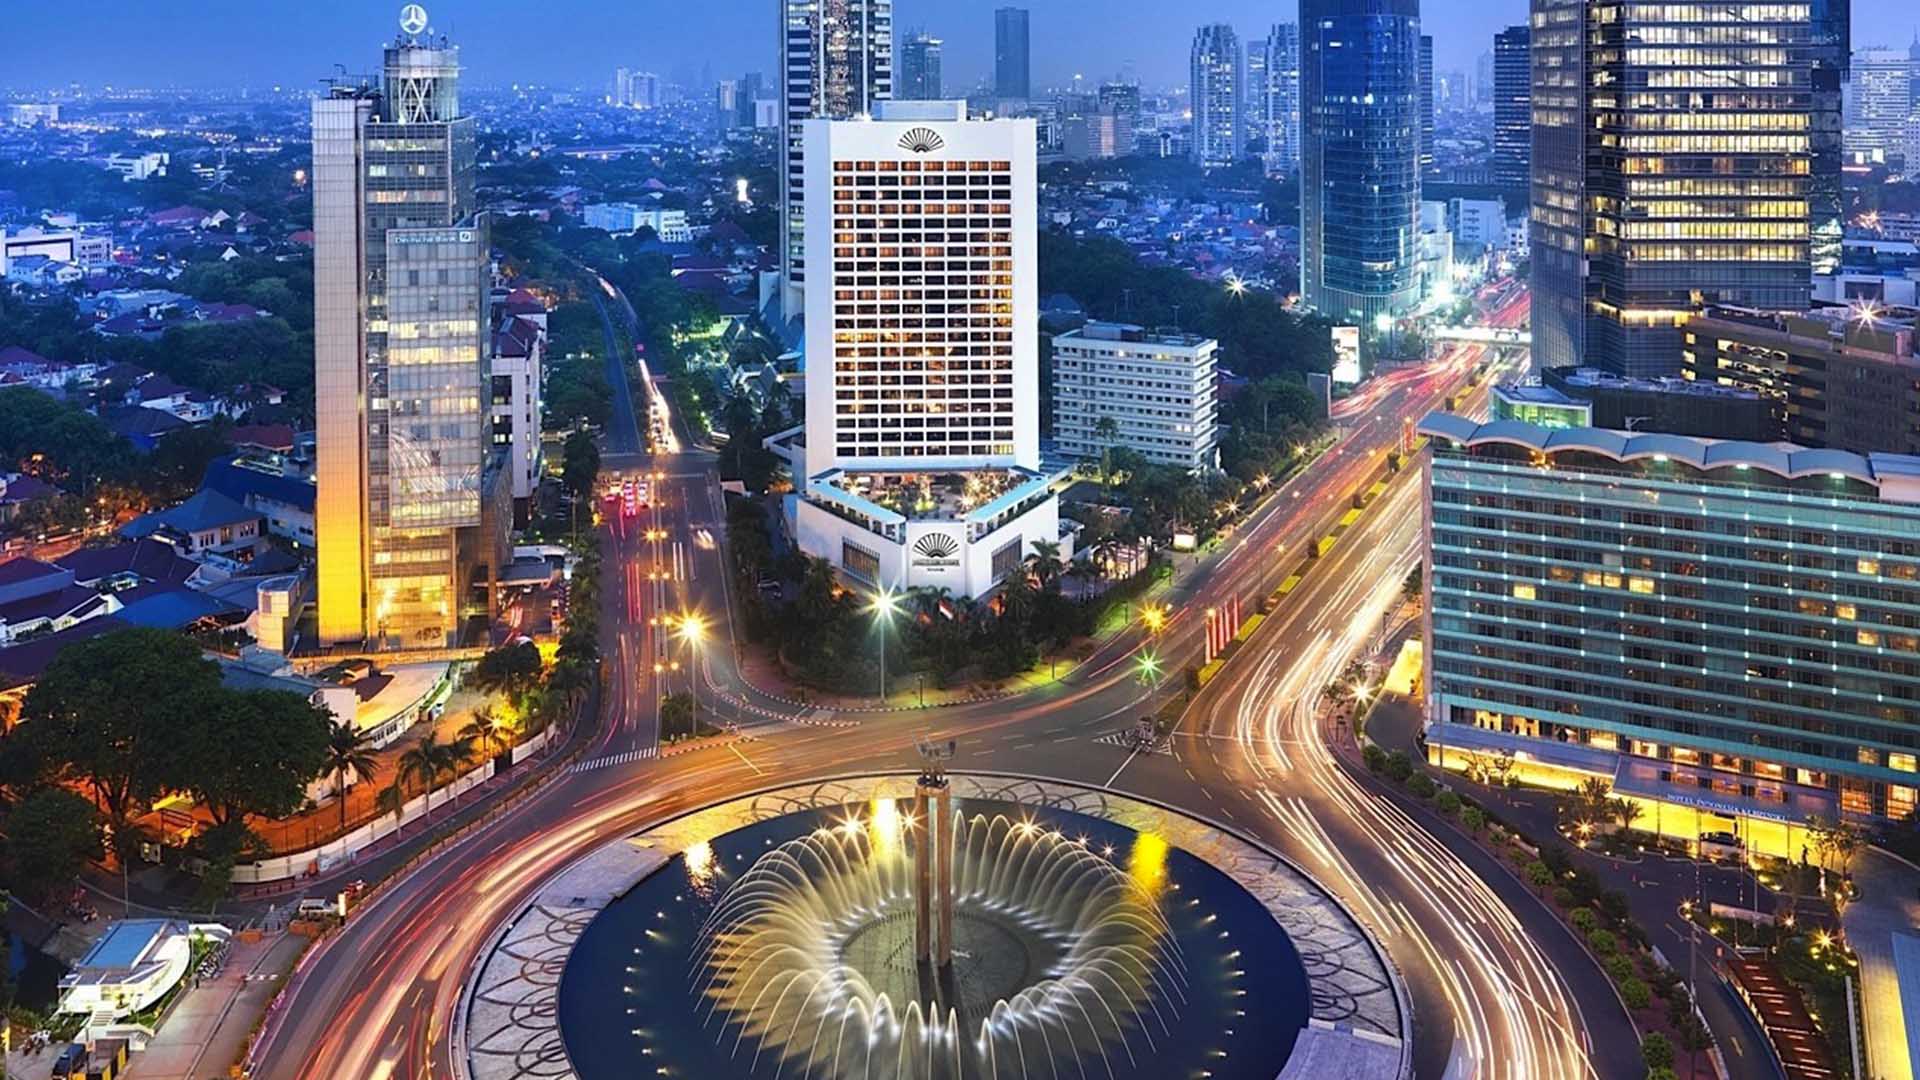 Jakarta wallpapers, Man Made, HQ Jakarta pictures | 4K Wallpapers 2019